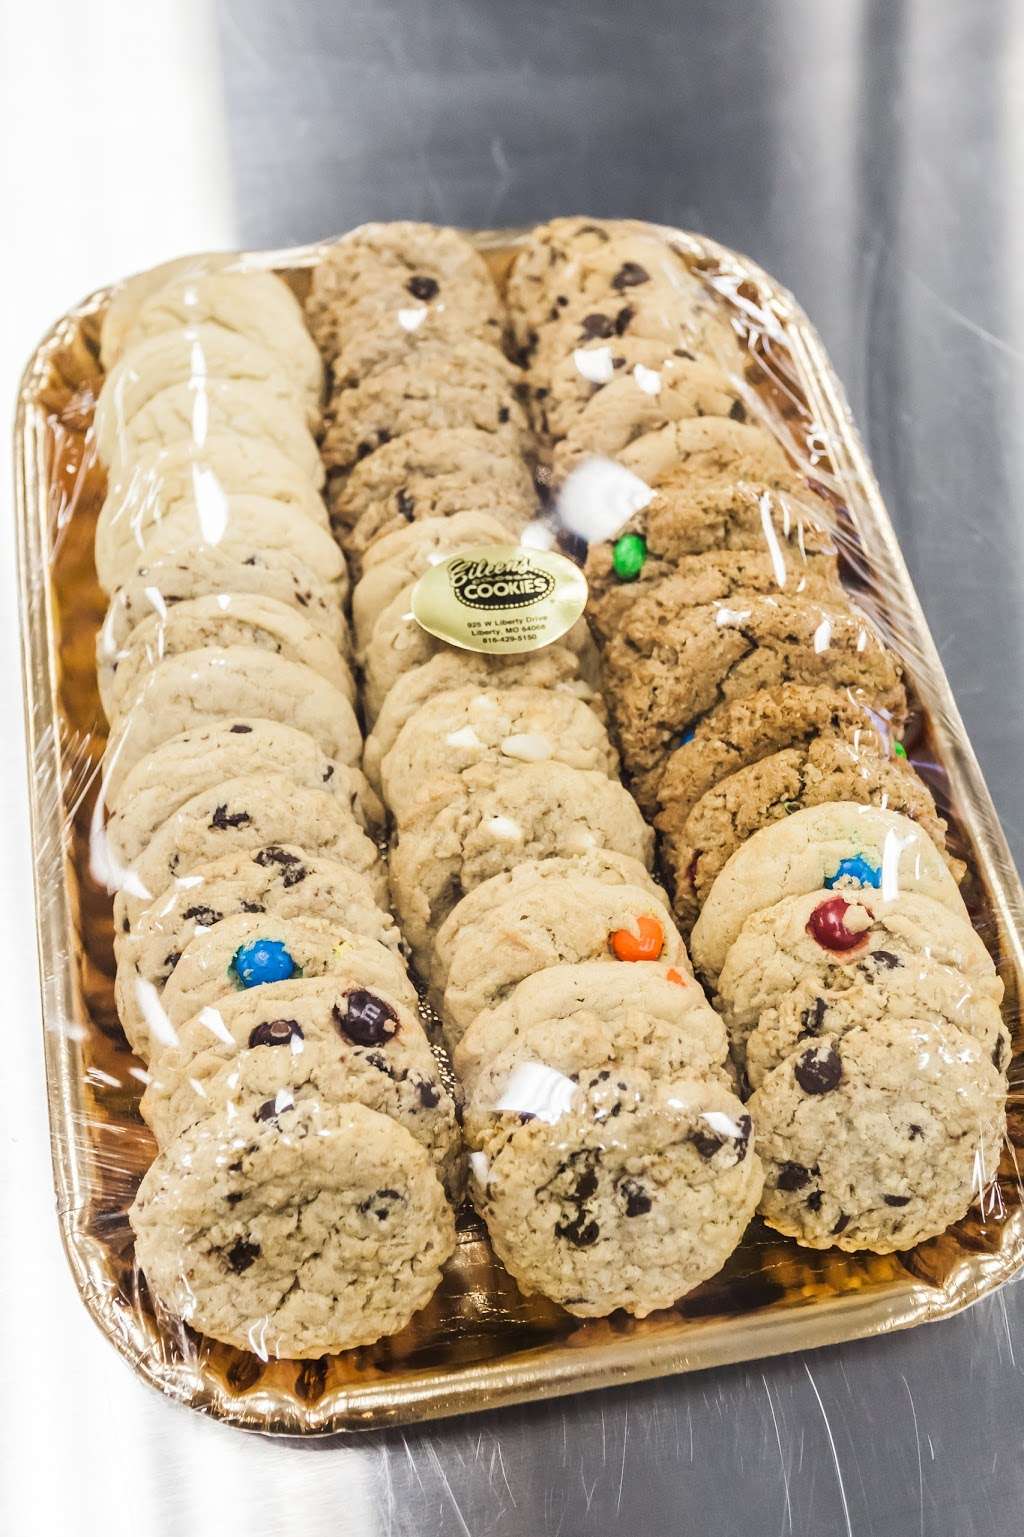 Eileens Colossal Cookies | 925 W Liberty Dr, Liberty, MO 64068 | Phone: (816) 429-5150